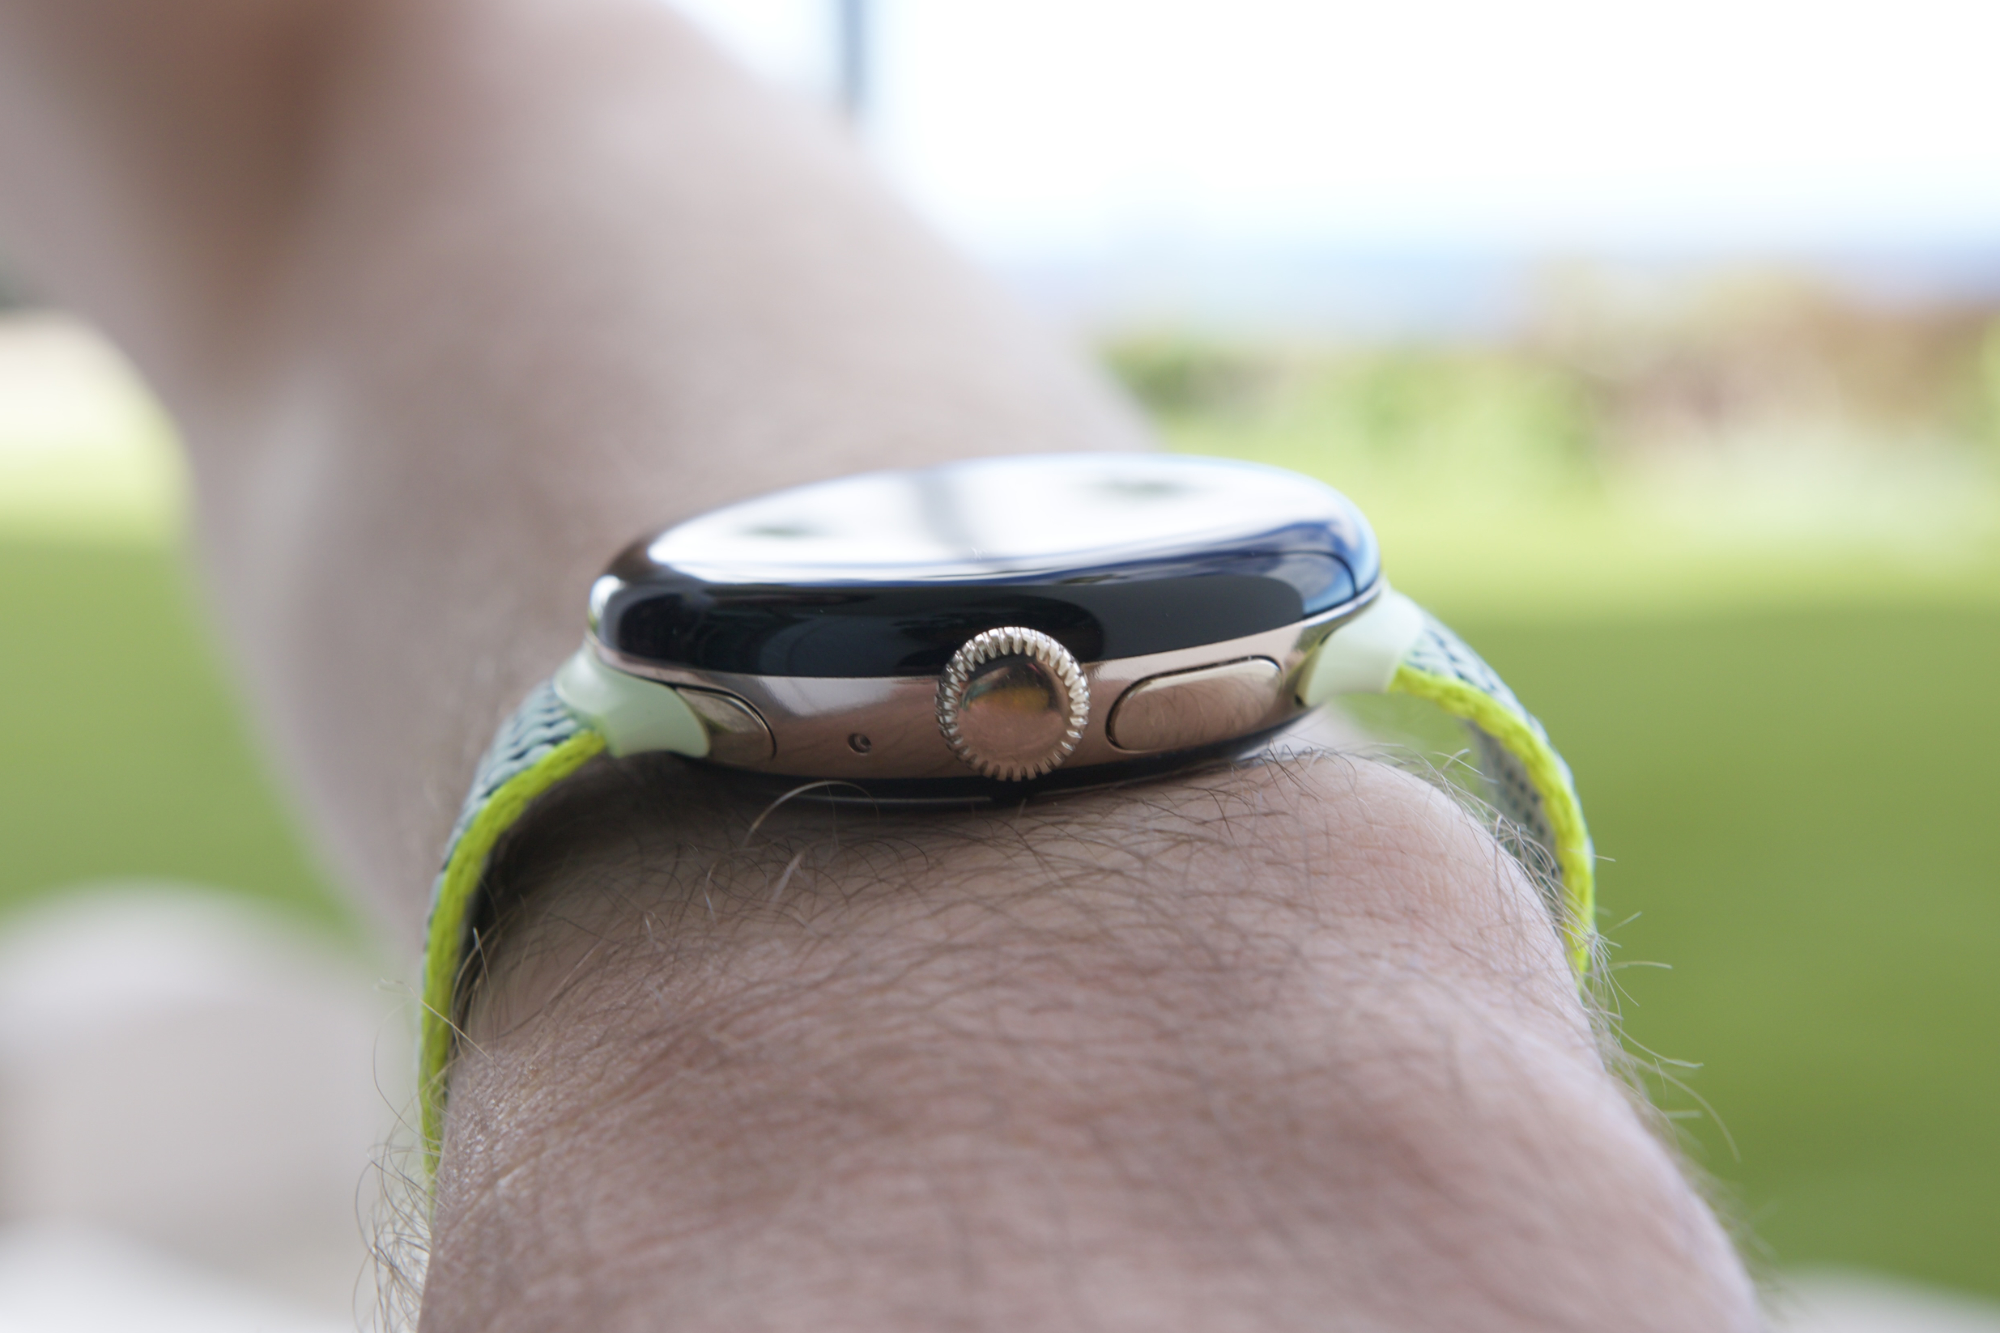 A close-up view of someone wearing the Google Pixel Watch 2, showing the rotating crown.